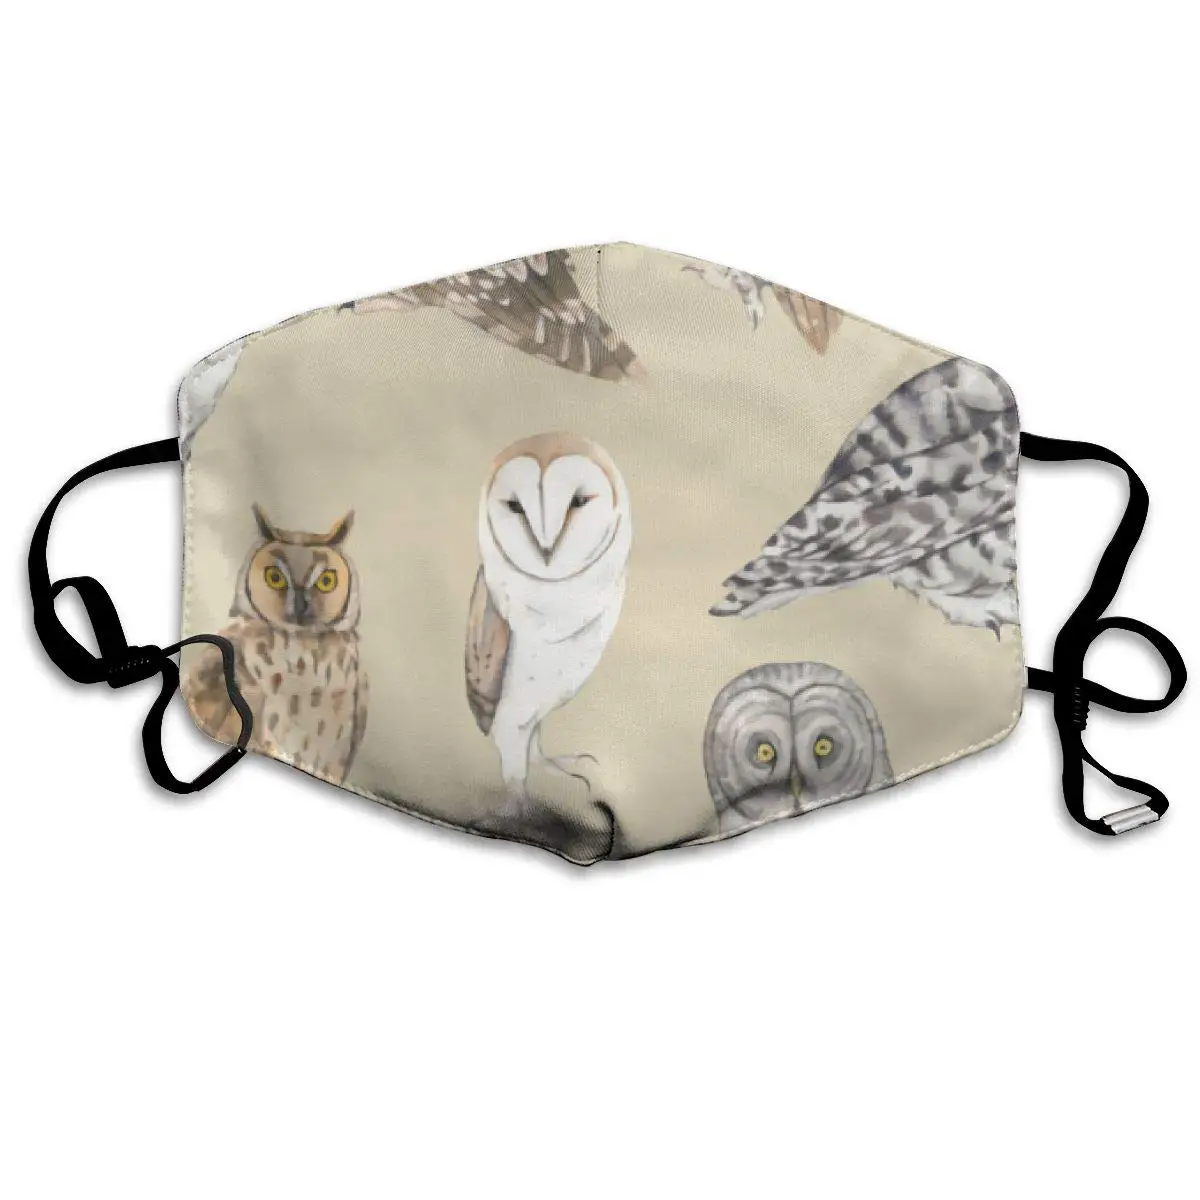 

Owls On Beige Washable Reusable Mask, Cotton Anti Dust Half Face Mouth Mask For Kids Teens Men Women With Adjustable Ear Loops